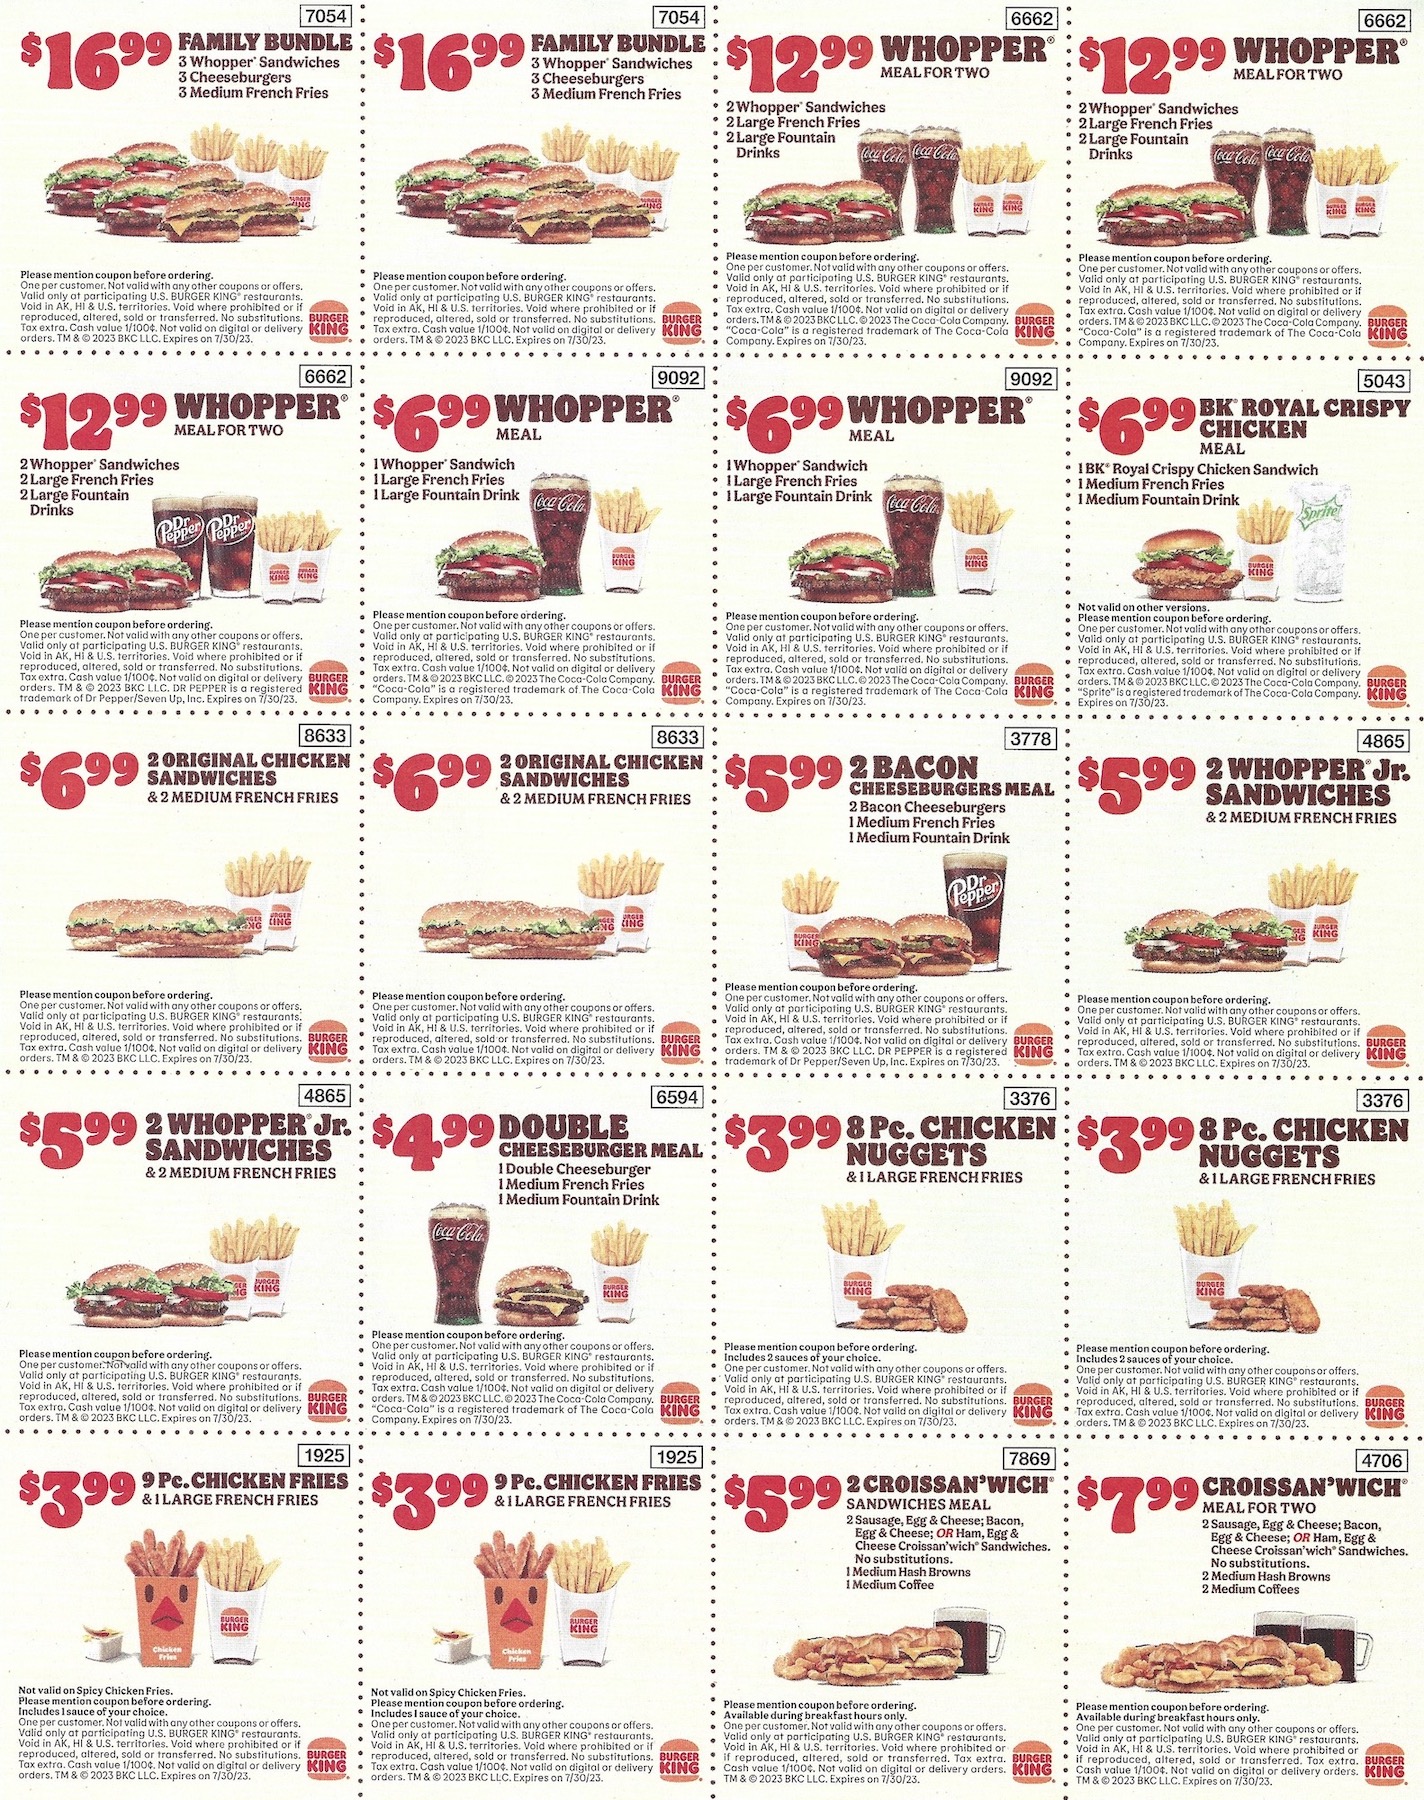 burger-king-coupons-spider-verse-whopper-expires-07-30-2023